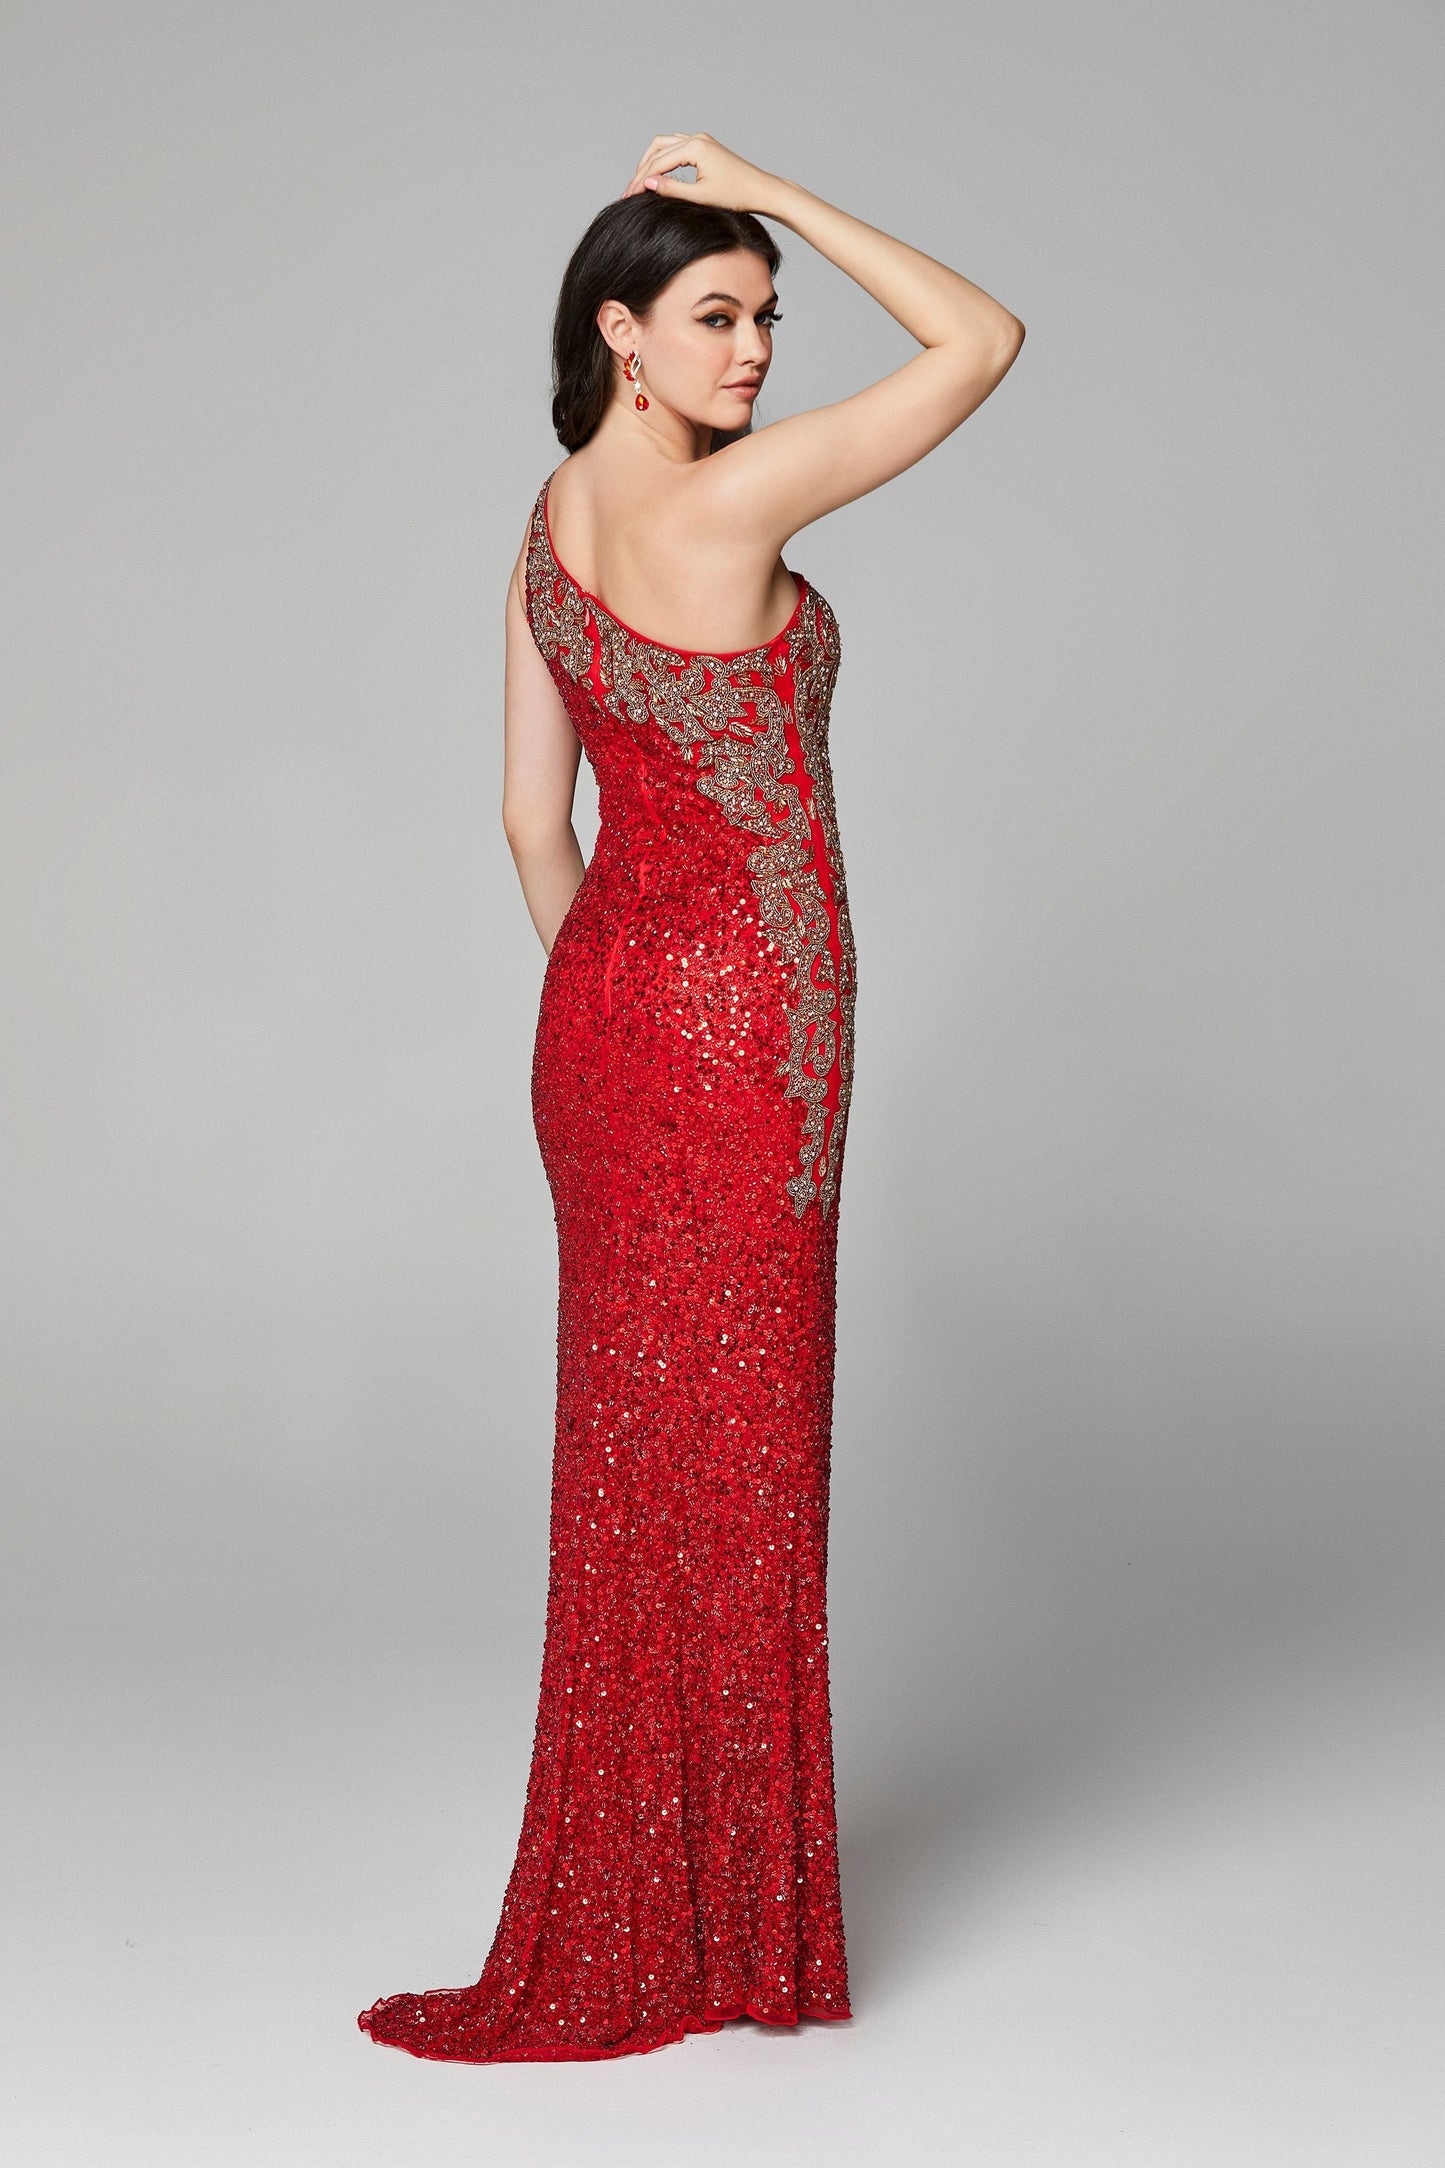 Primavera Couture 3637 is a stunning Long Fitted Sequin Embellished Formal Evening Gown. This One Shoulder Prom Dress Features Beaded Embellishments cascading from the one shoulder neckline down the side of the gown along the hip. Slit in skirt with a sweeping train. Great Pageant Formal Style.  Available Sizes: 00,0,2,4,6,8,10,12,14,16,18  Available Colors: Black, Platinum/Gold, Red